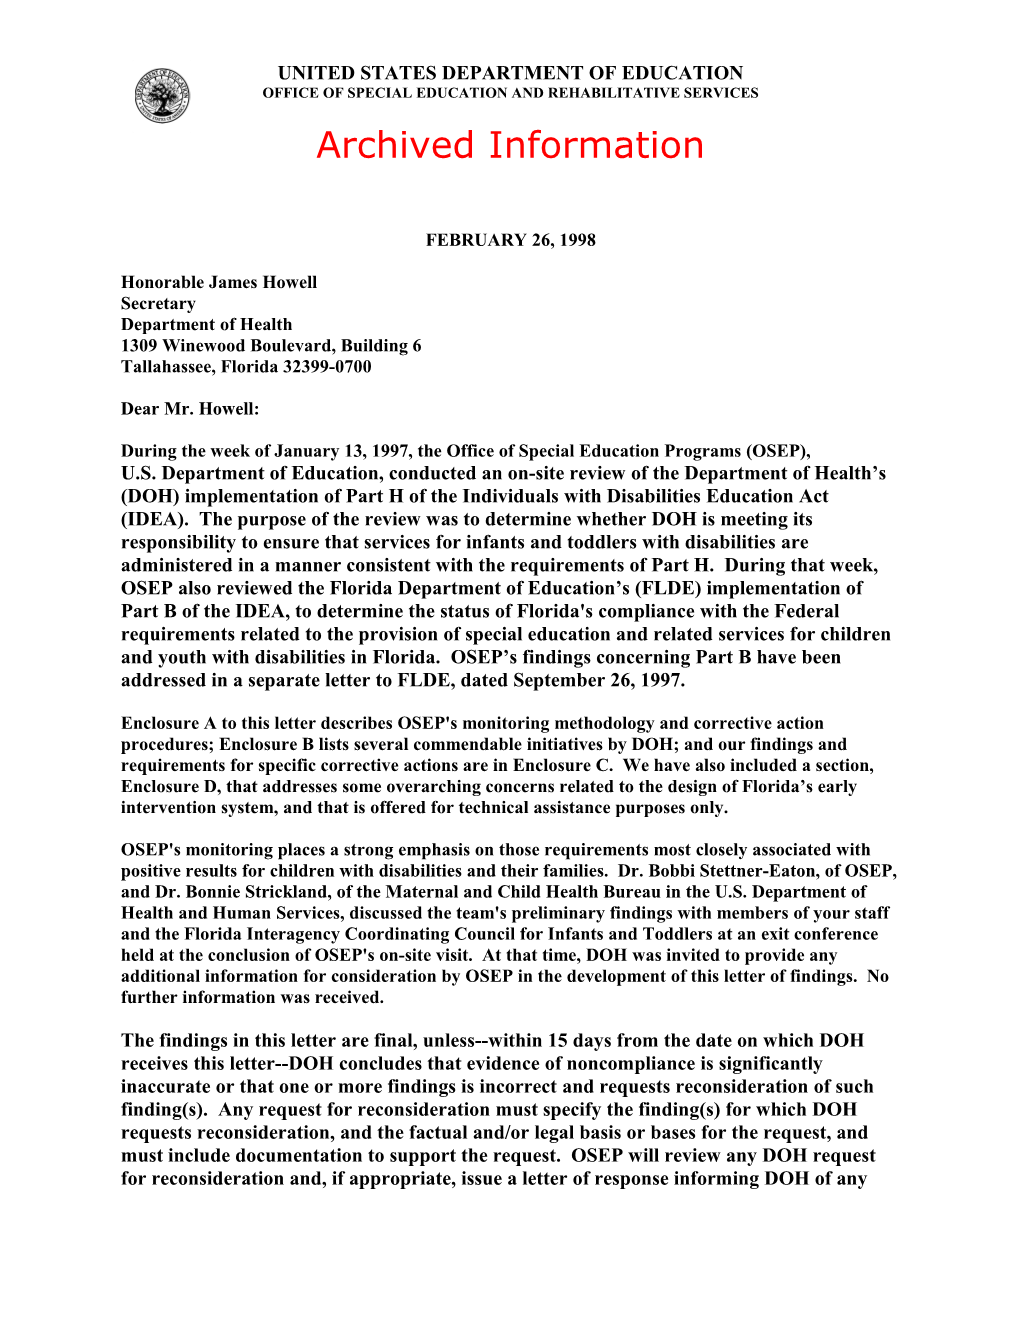 Archived: Letter from OSEP's Thomas Hehir to FL DOH